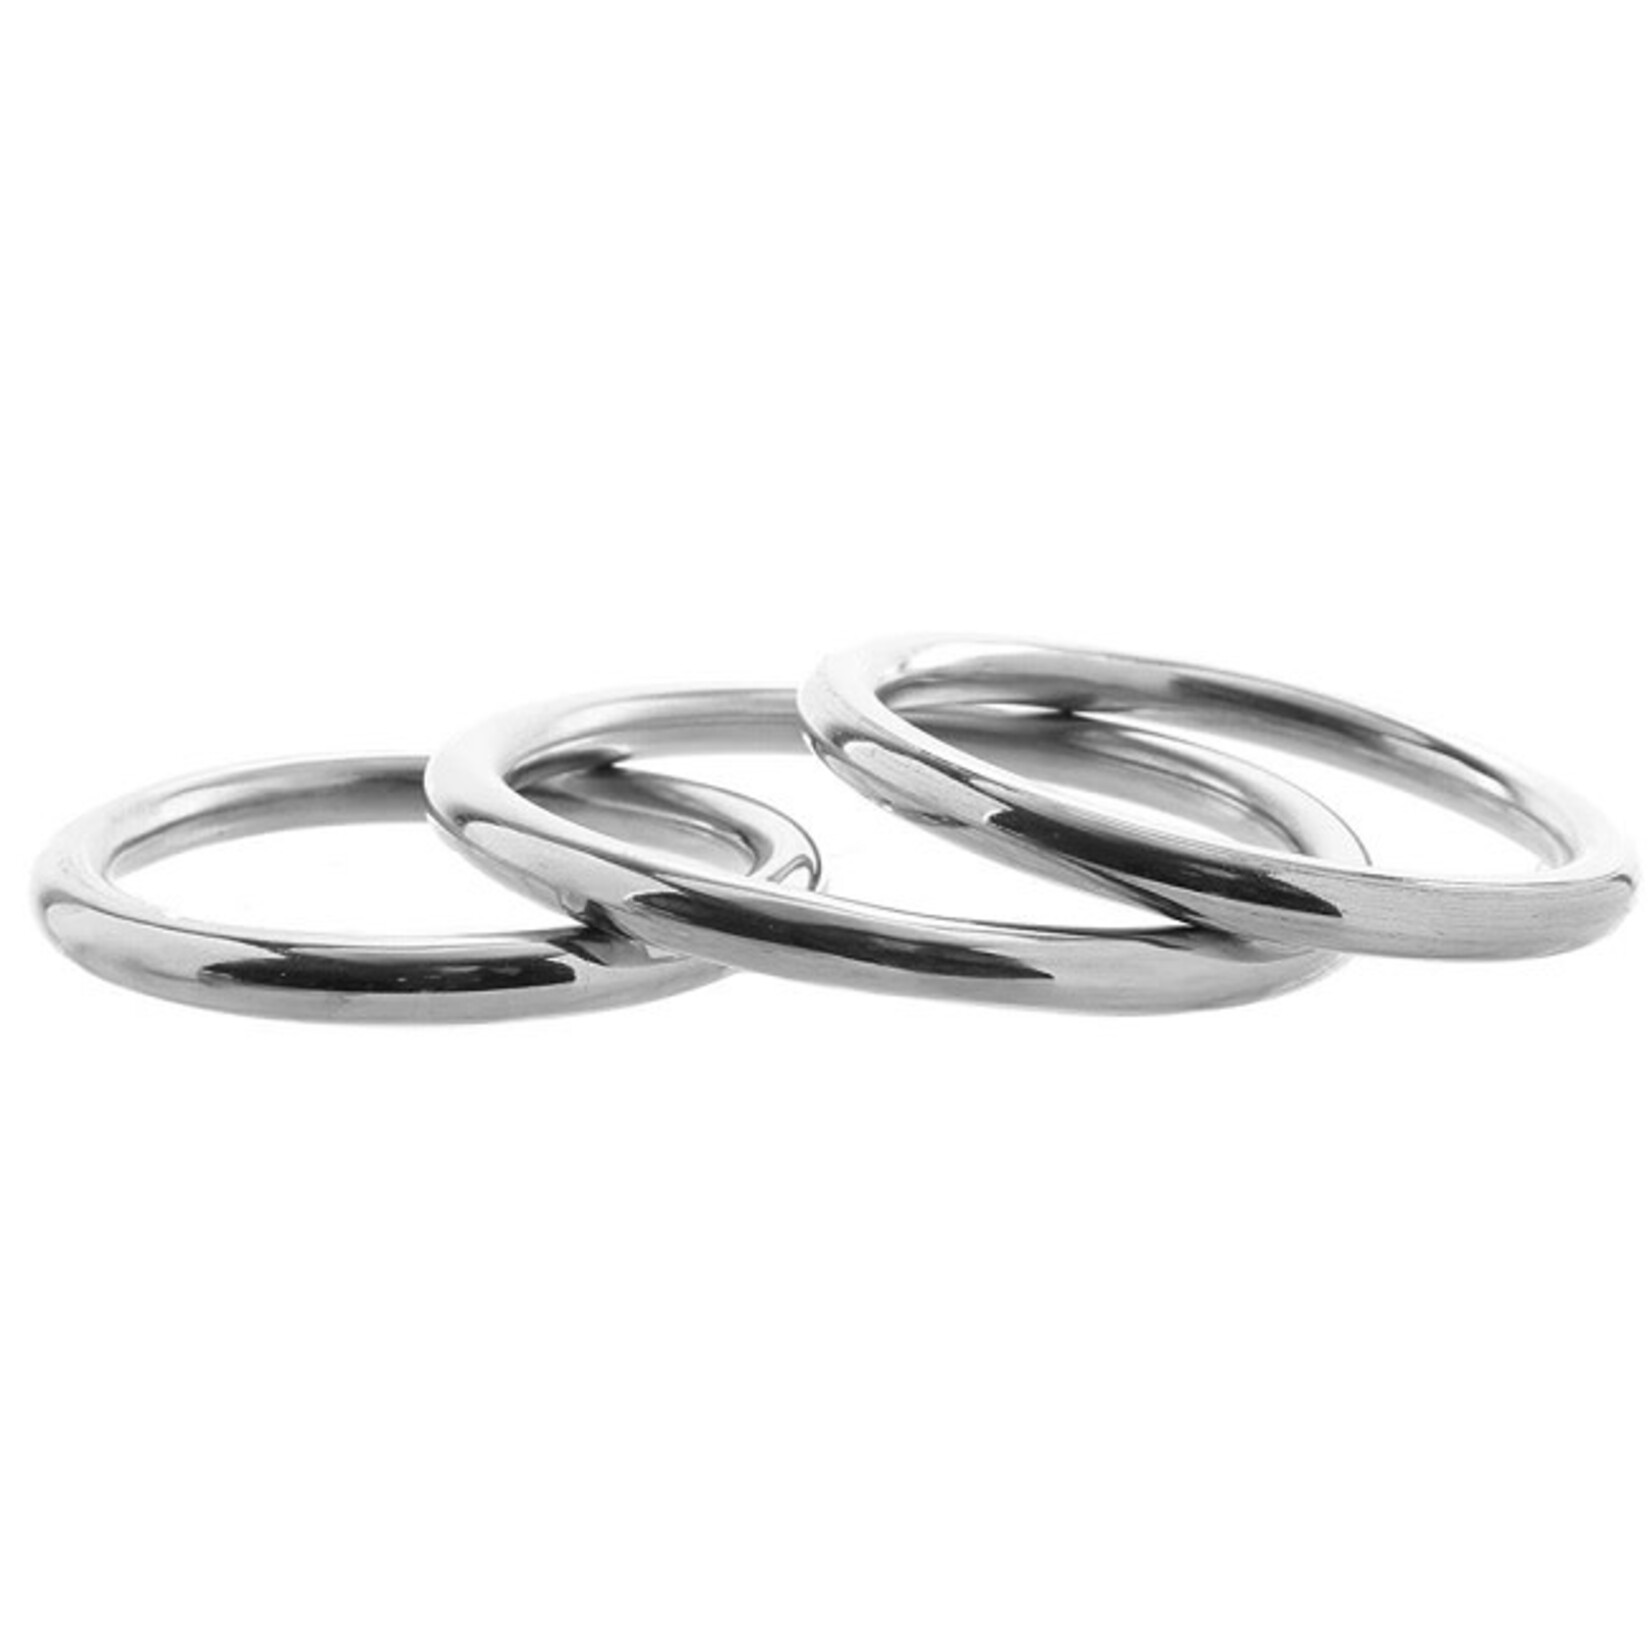 Rouge Rouge Stainless Steel 3 Piece Cock Ring Set